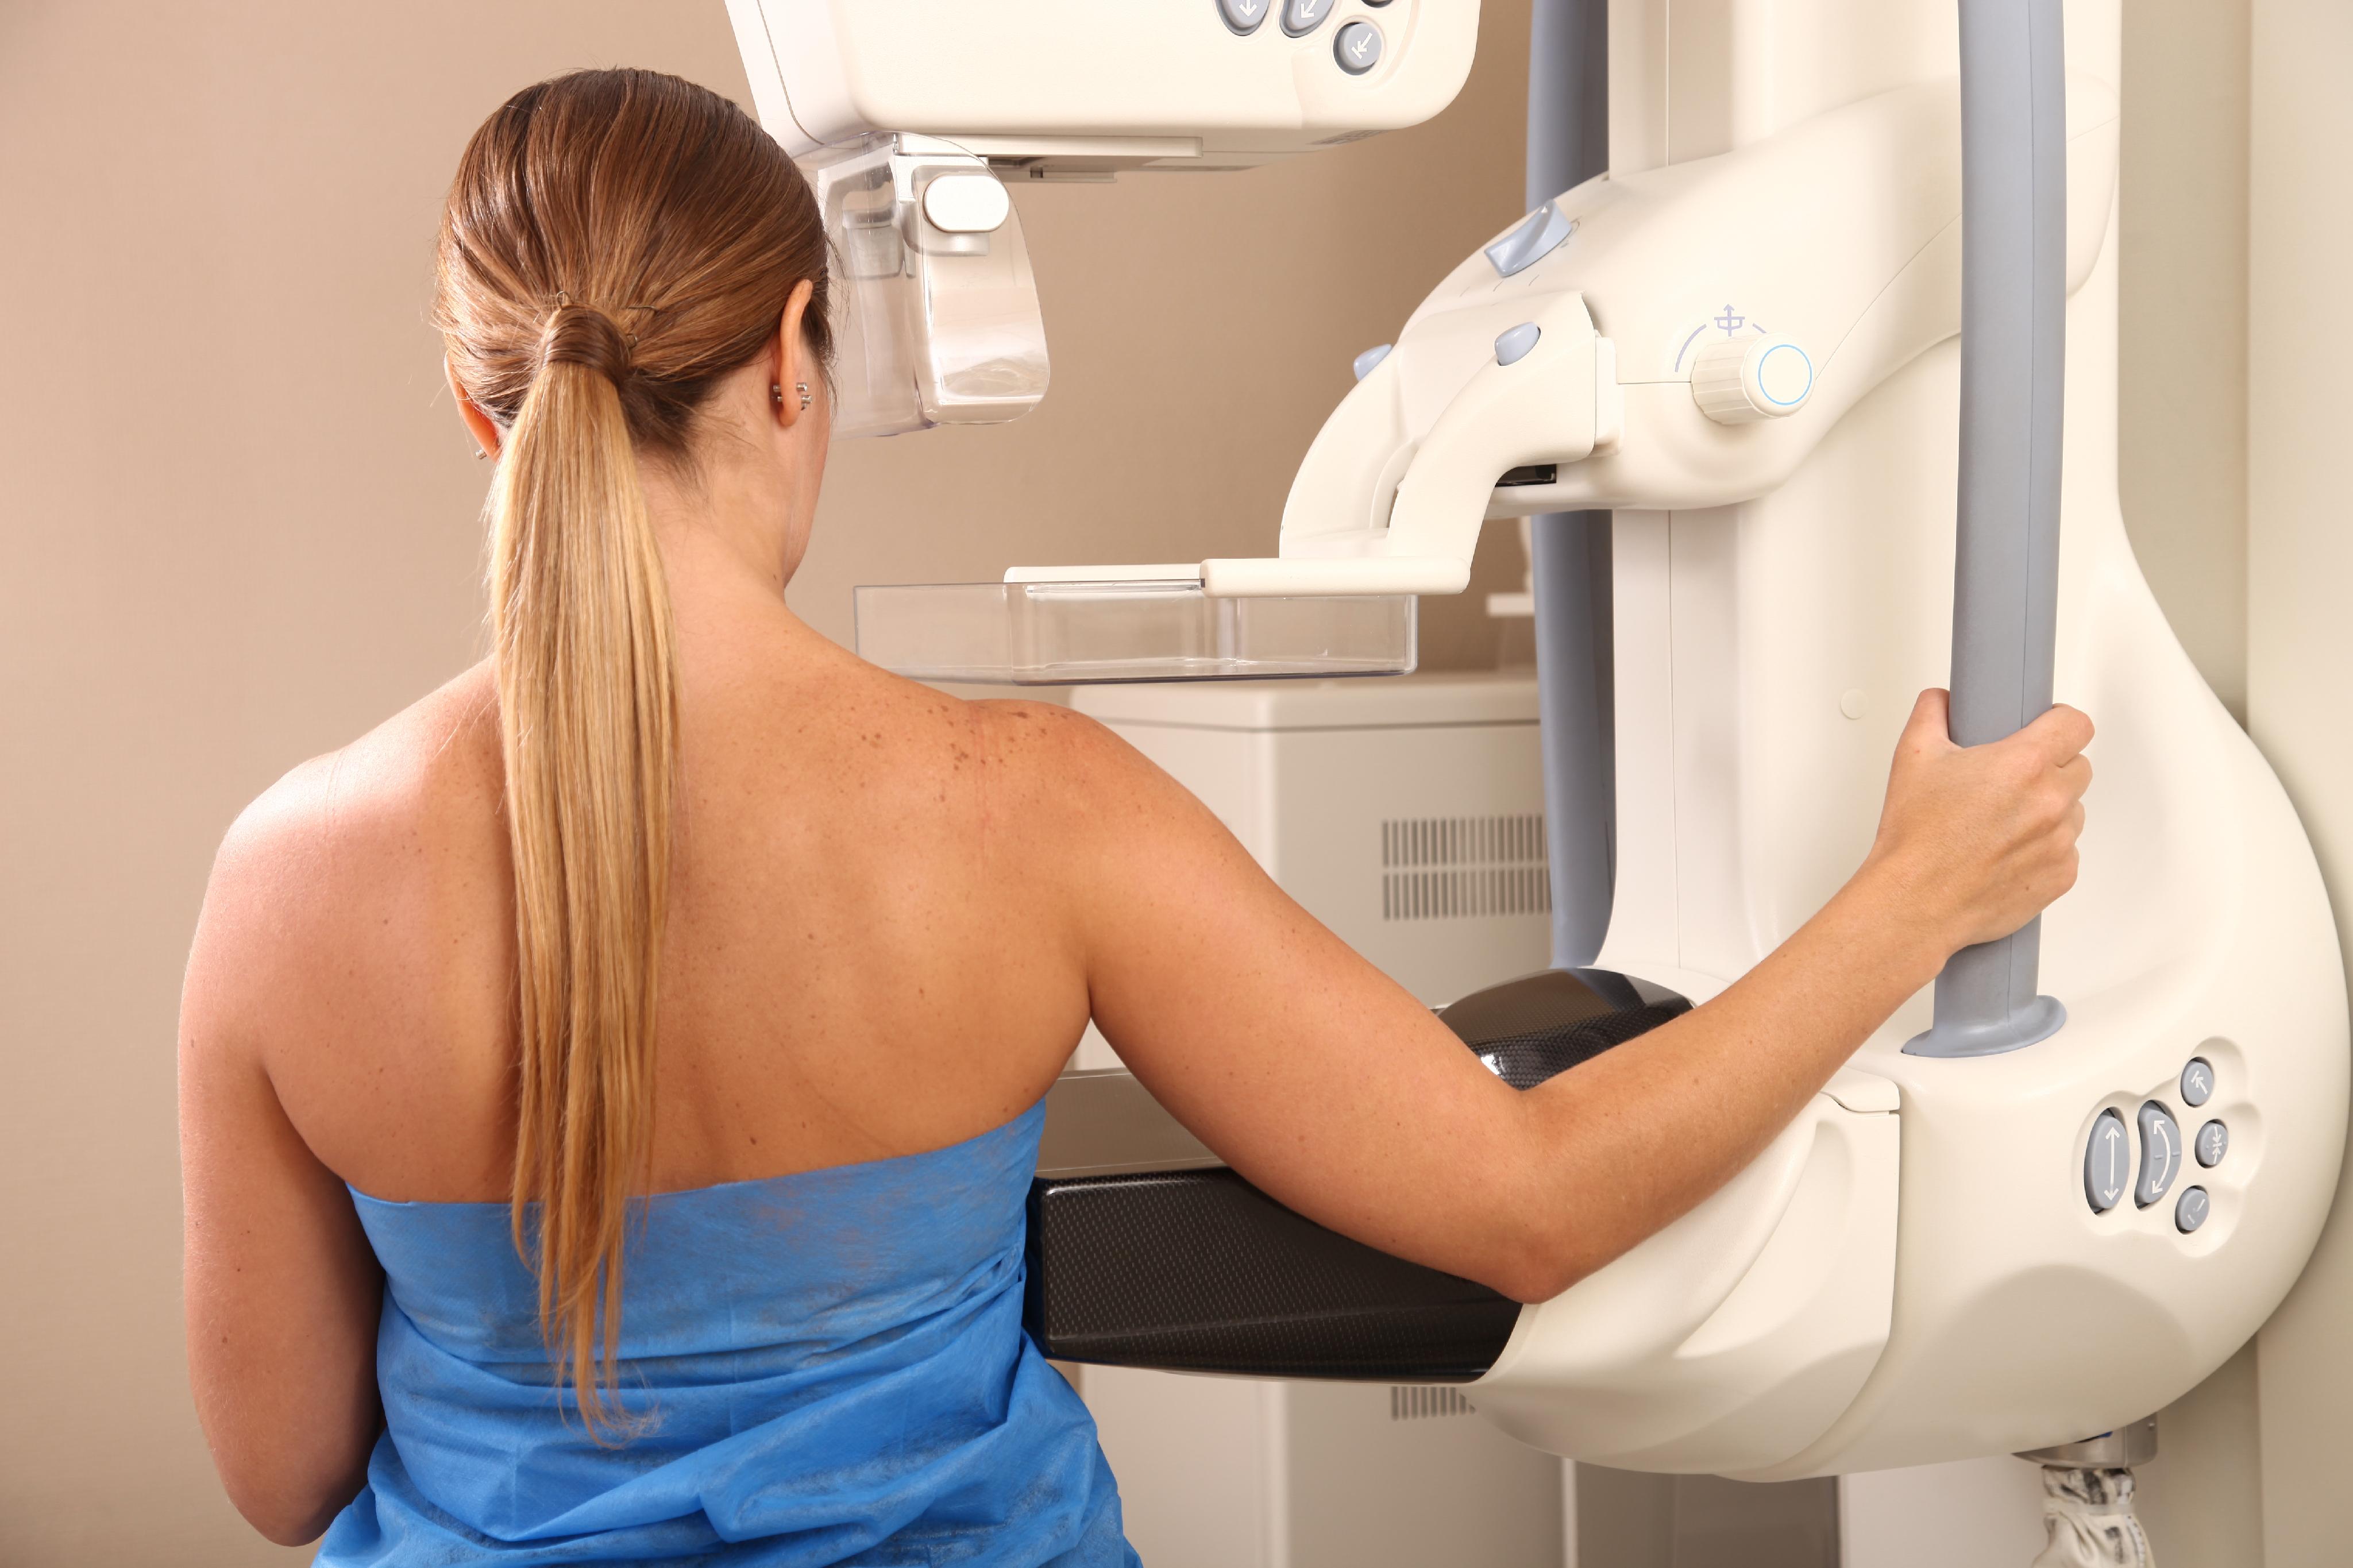 What are the Signs and Symptoms of Breast Cancer and the Treatment for Breast Cancer?